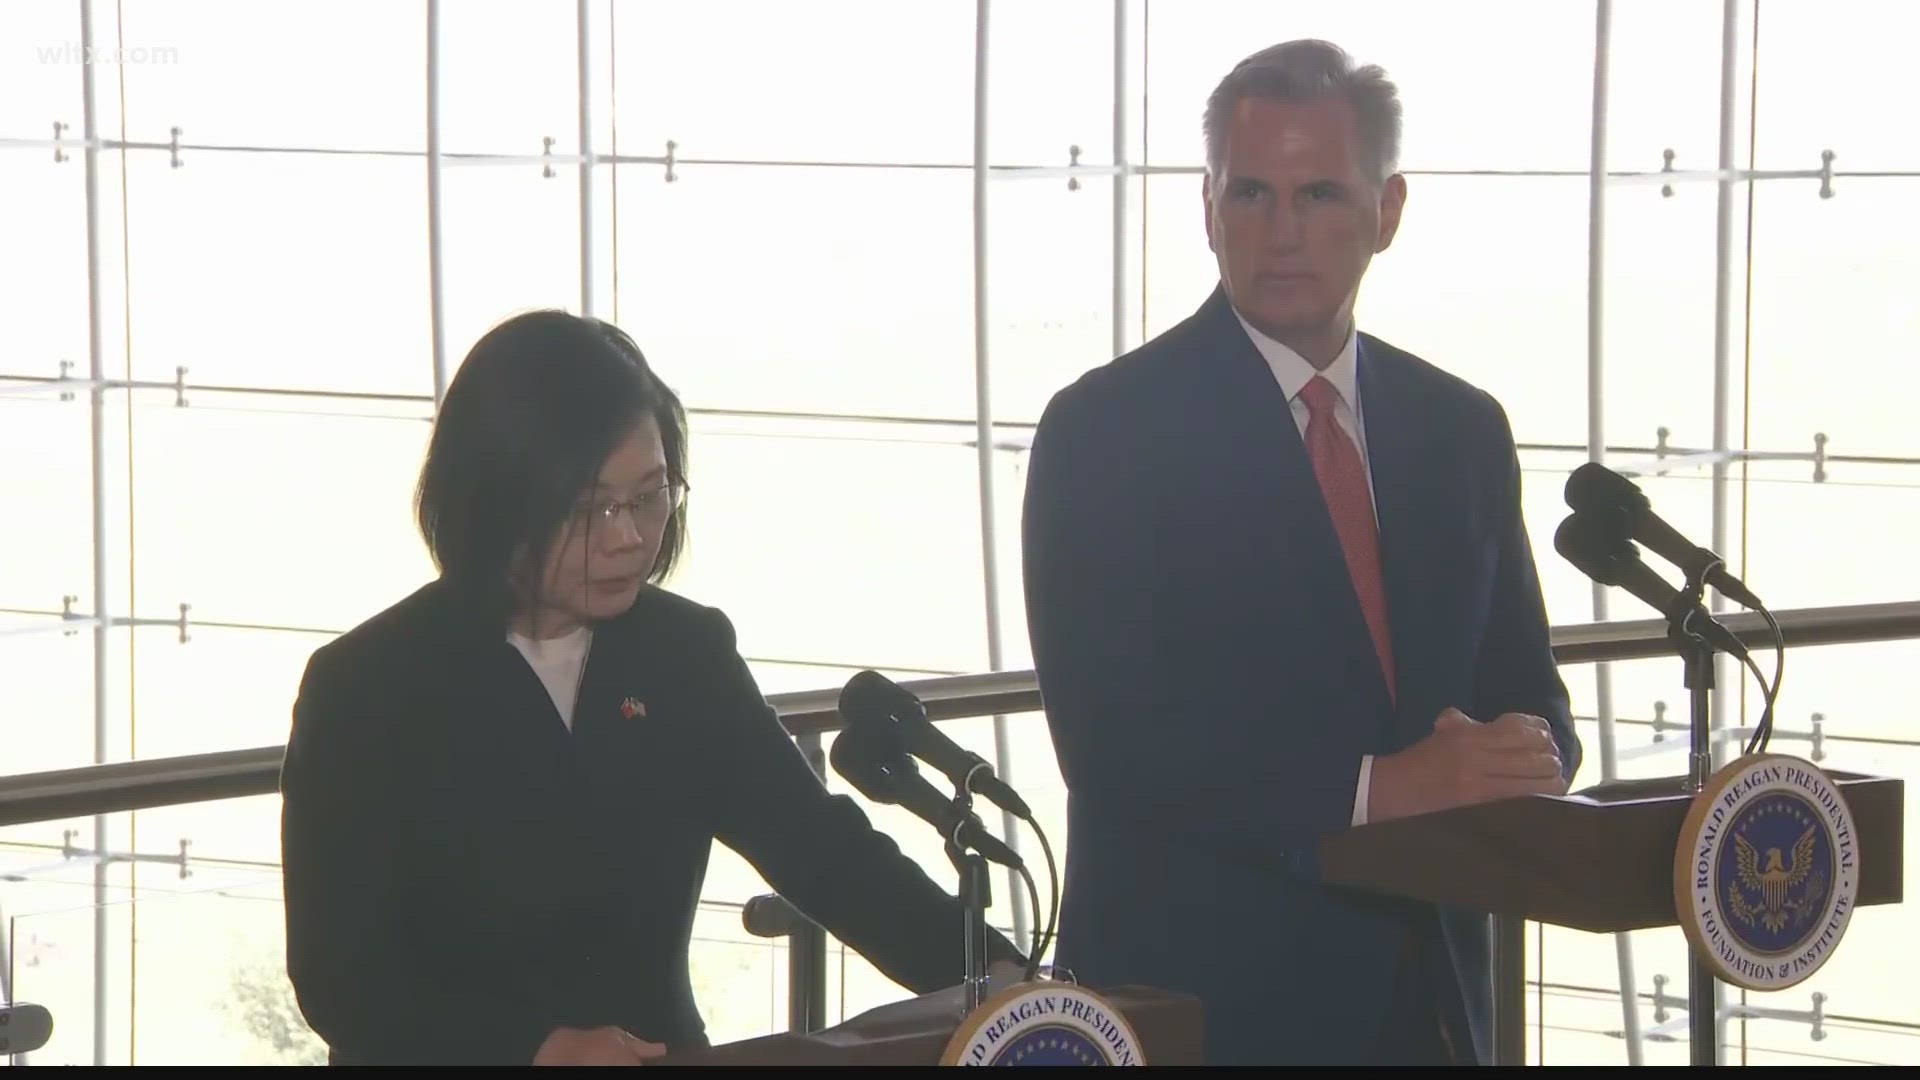 Risking China's anger, House Speaker Kevin McCarthy hosted Taiwan President Tsai Ing-wen on Wednesday.